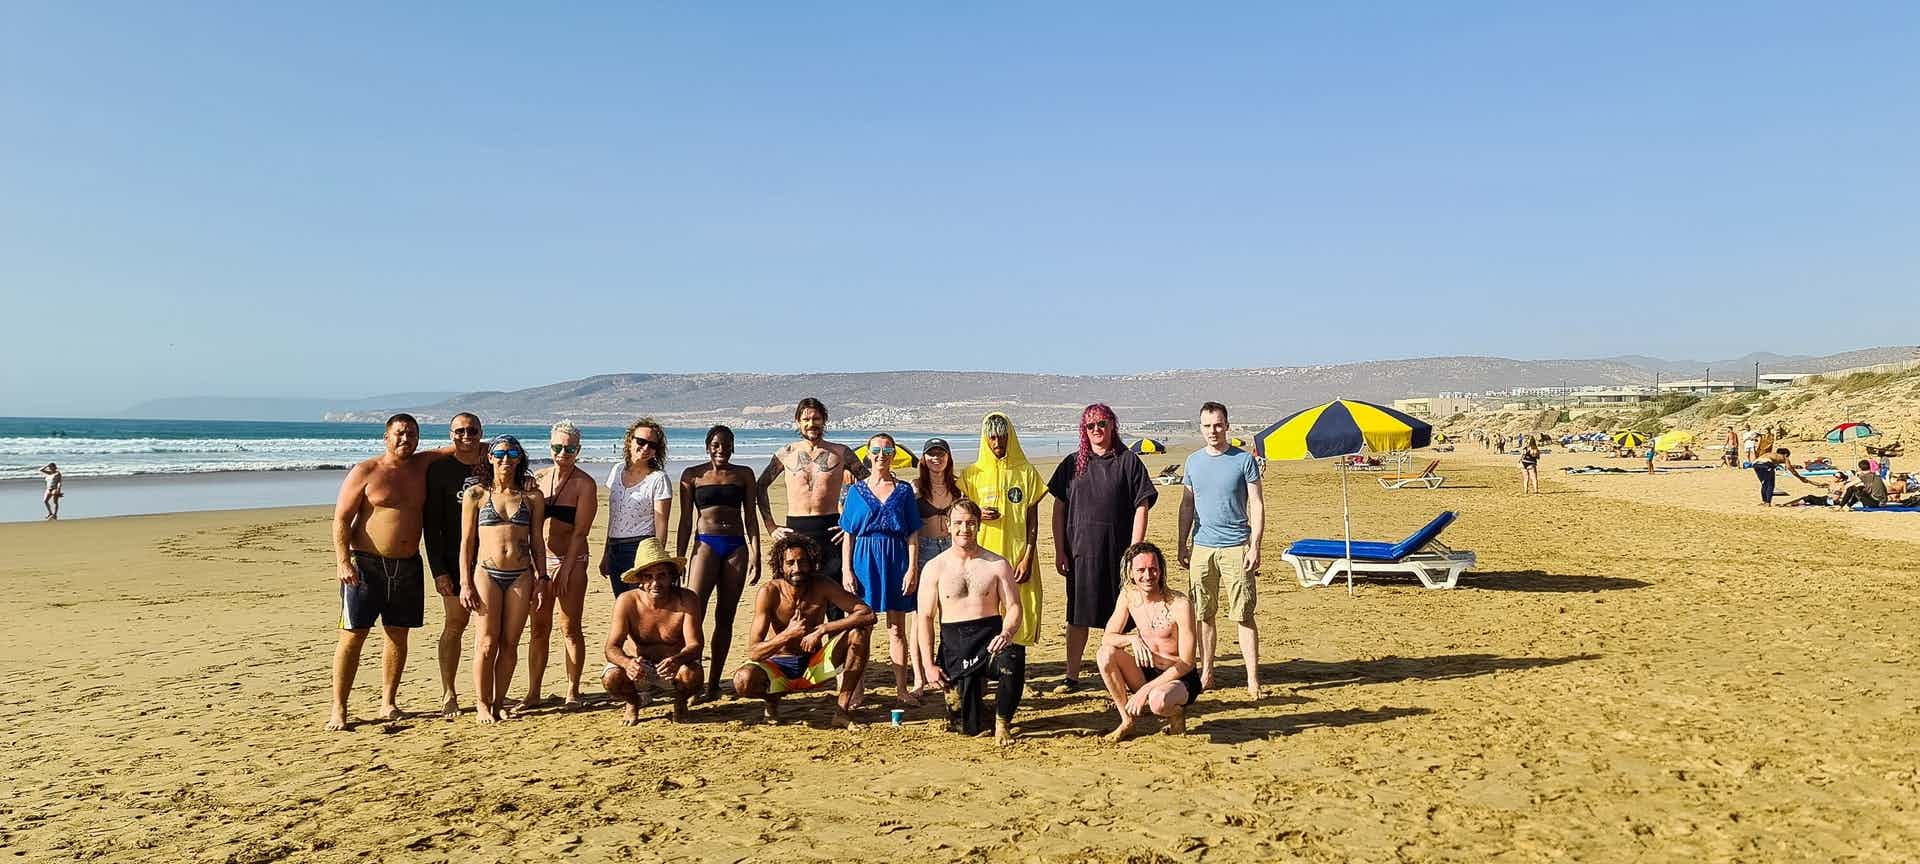 MBA surf trip to Morocco was absolutely inc...